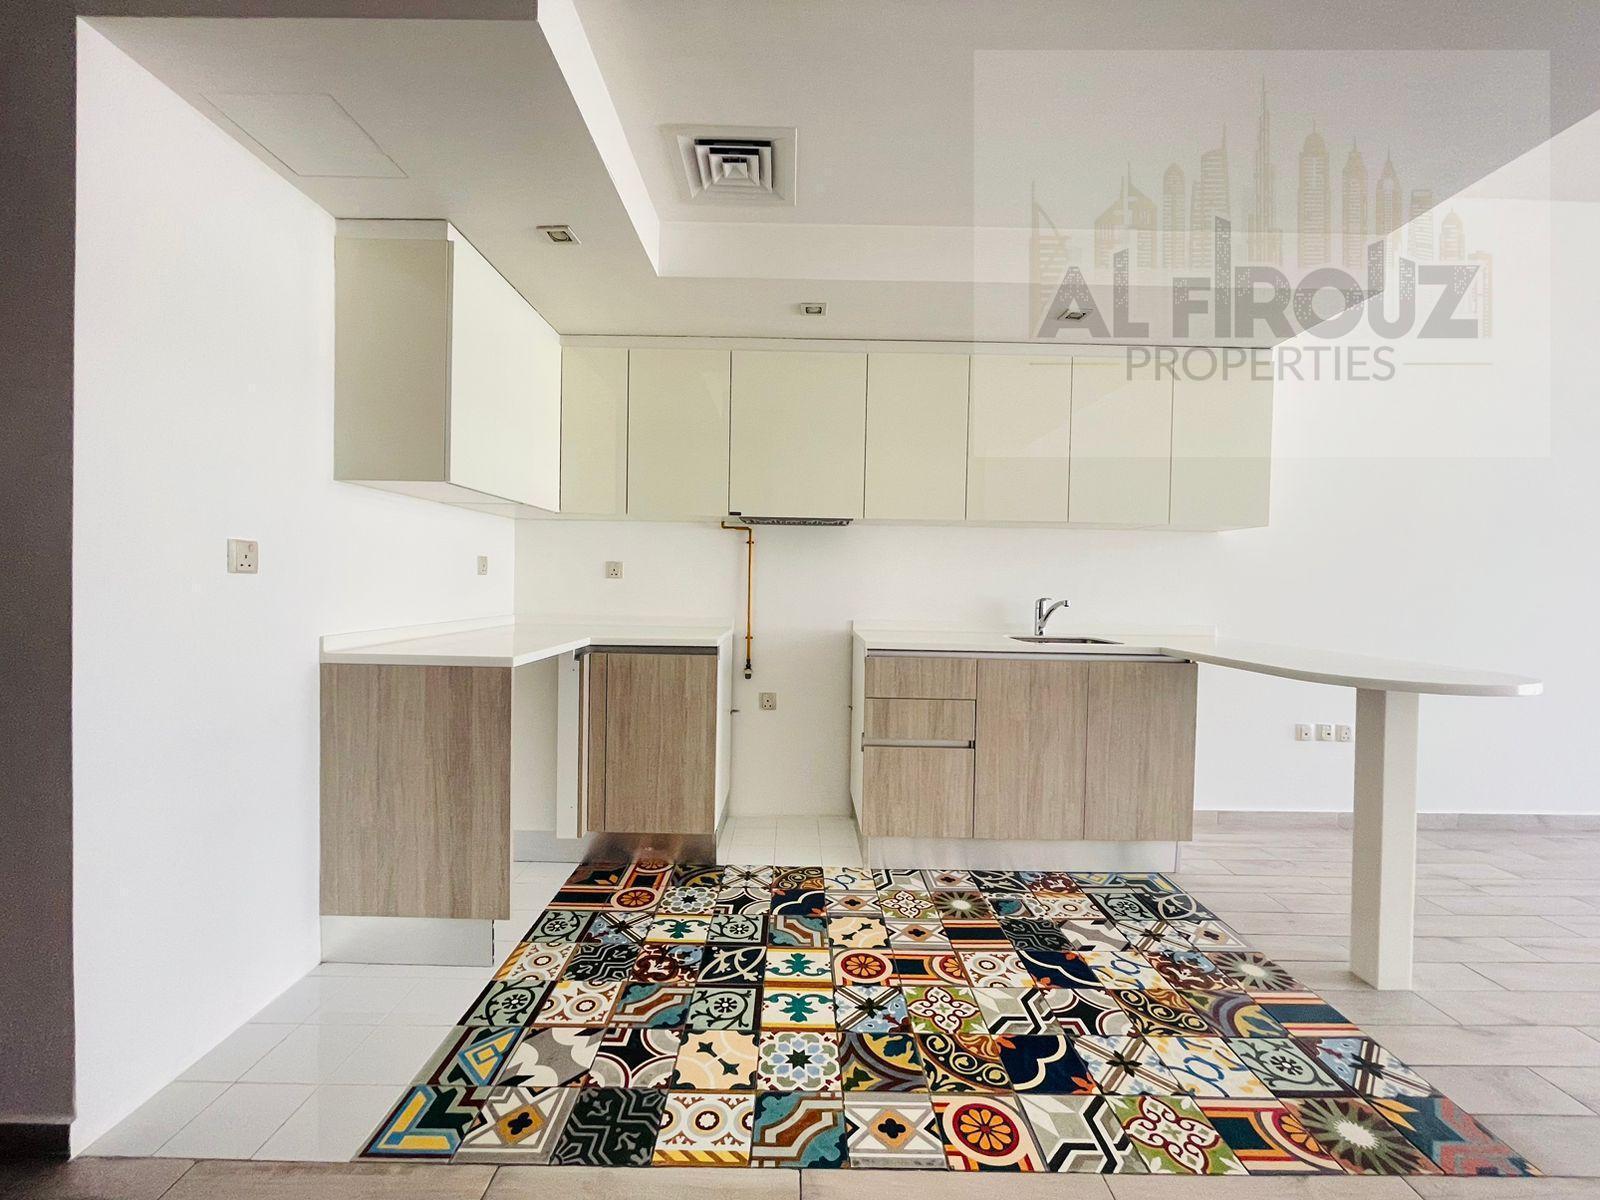 1 bath Apartment for rent in Shamal Residences, Jumeirah Village Circle, Dubai for price AED 45000 yearly 